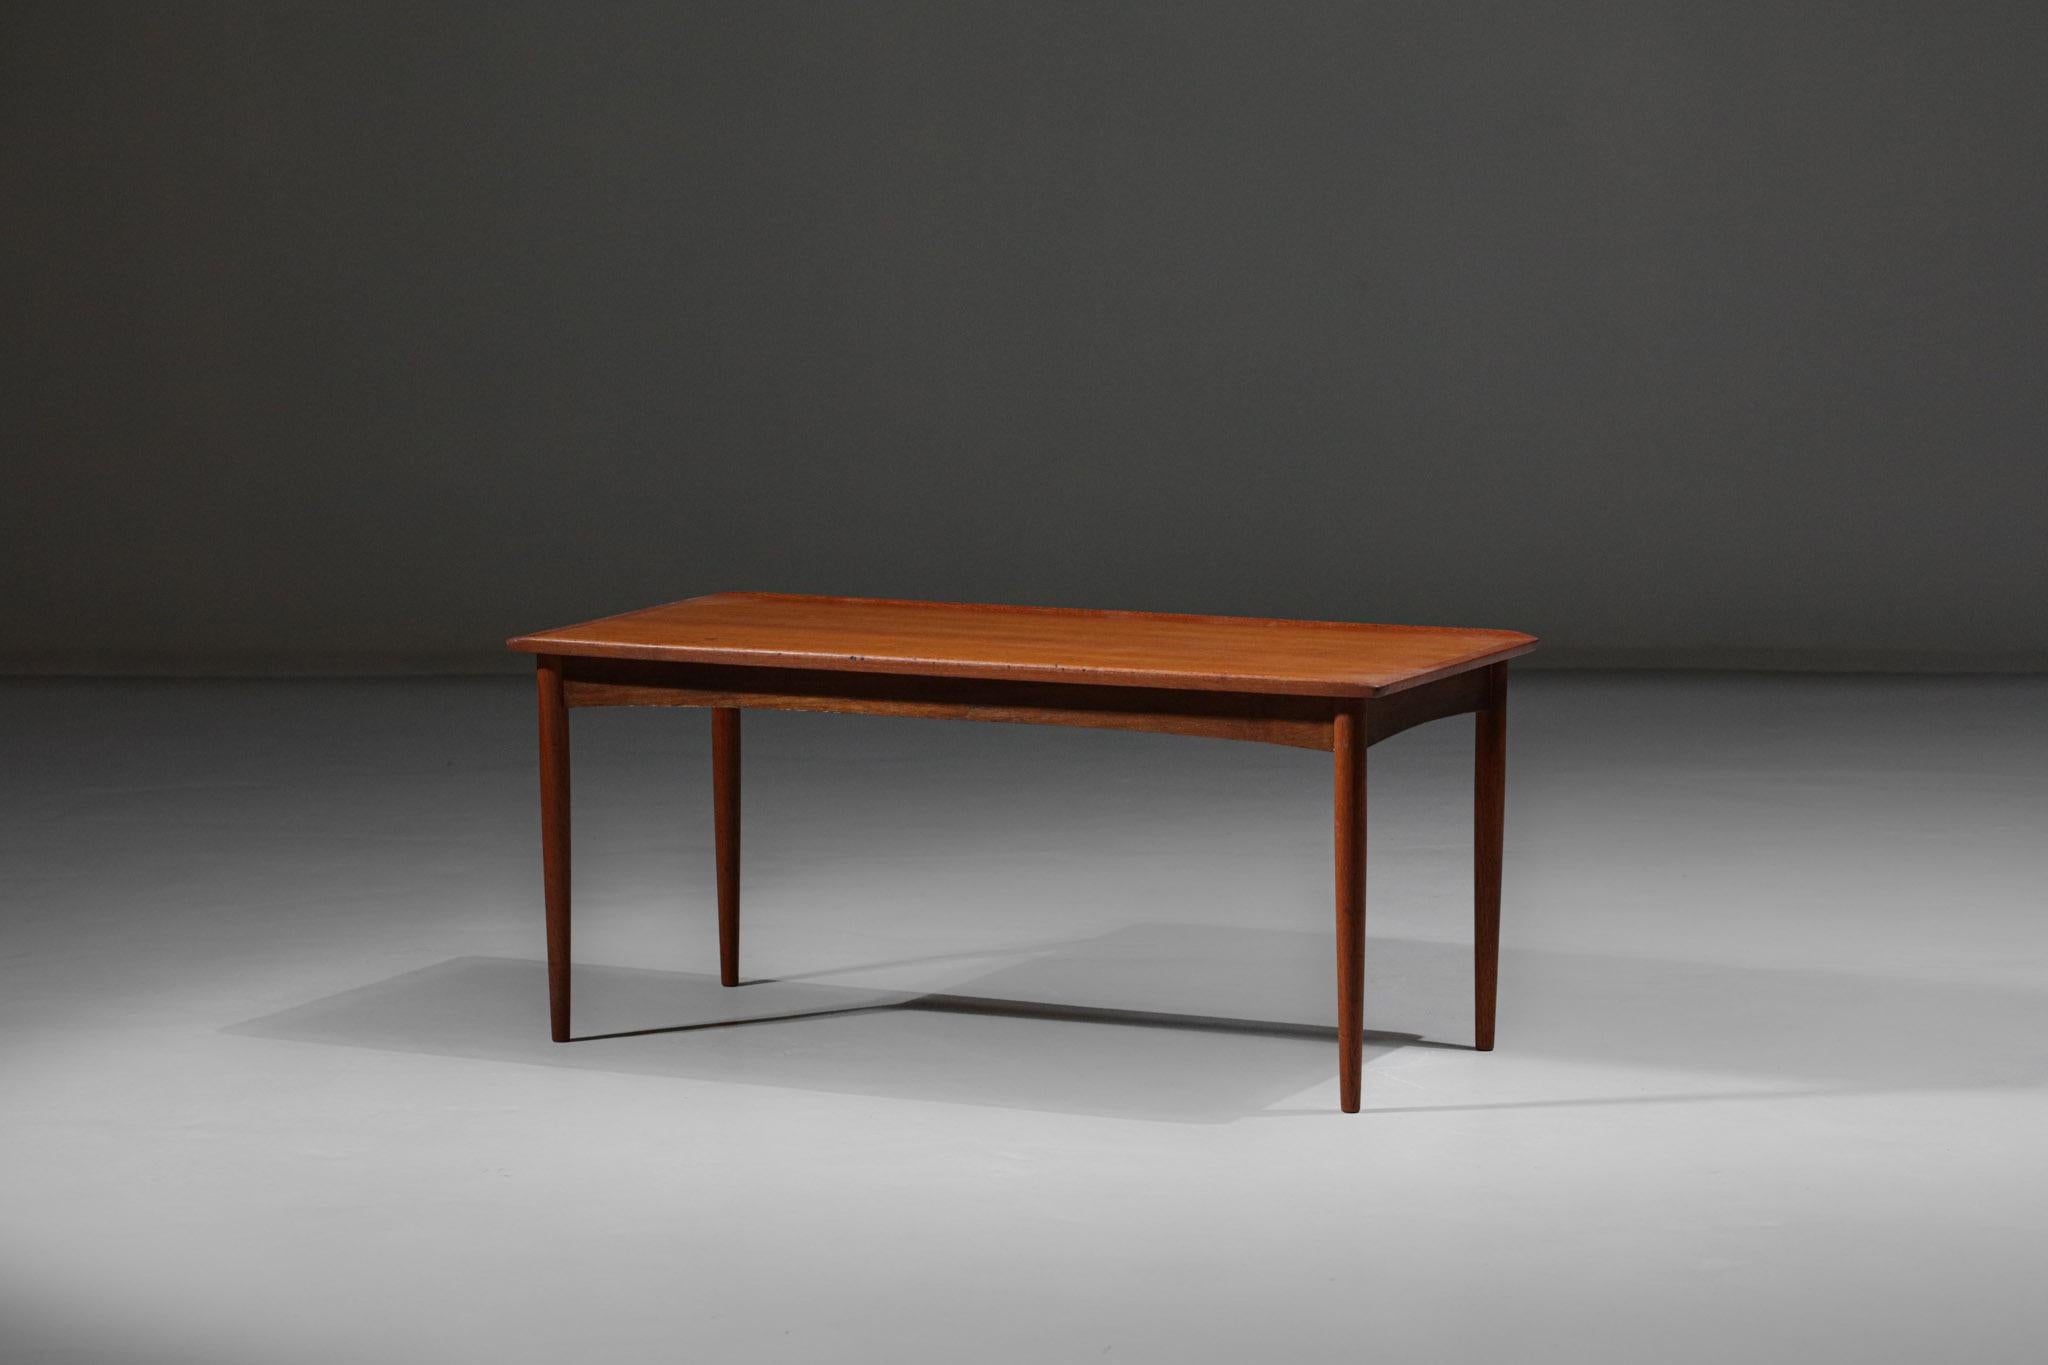 Danish coffee table from the 1970s. Solid teak or veneer structure, nice work of raised sides which gives an original look to this typical Scandinavian design table.